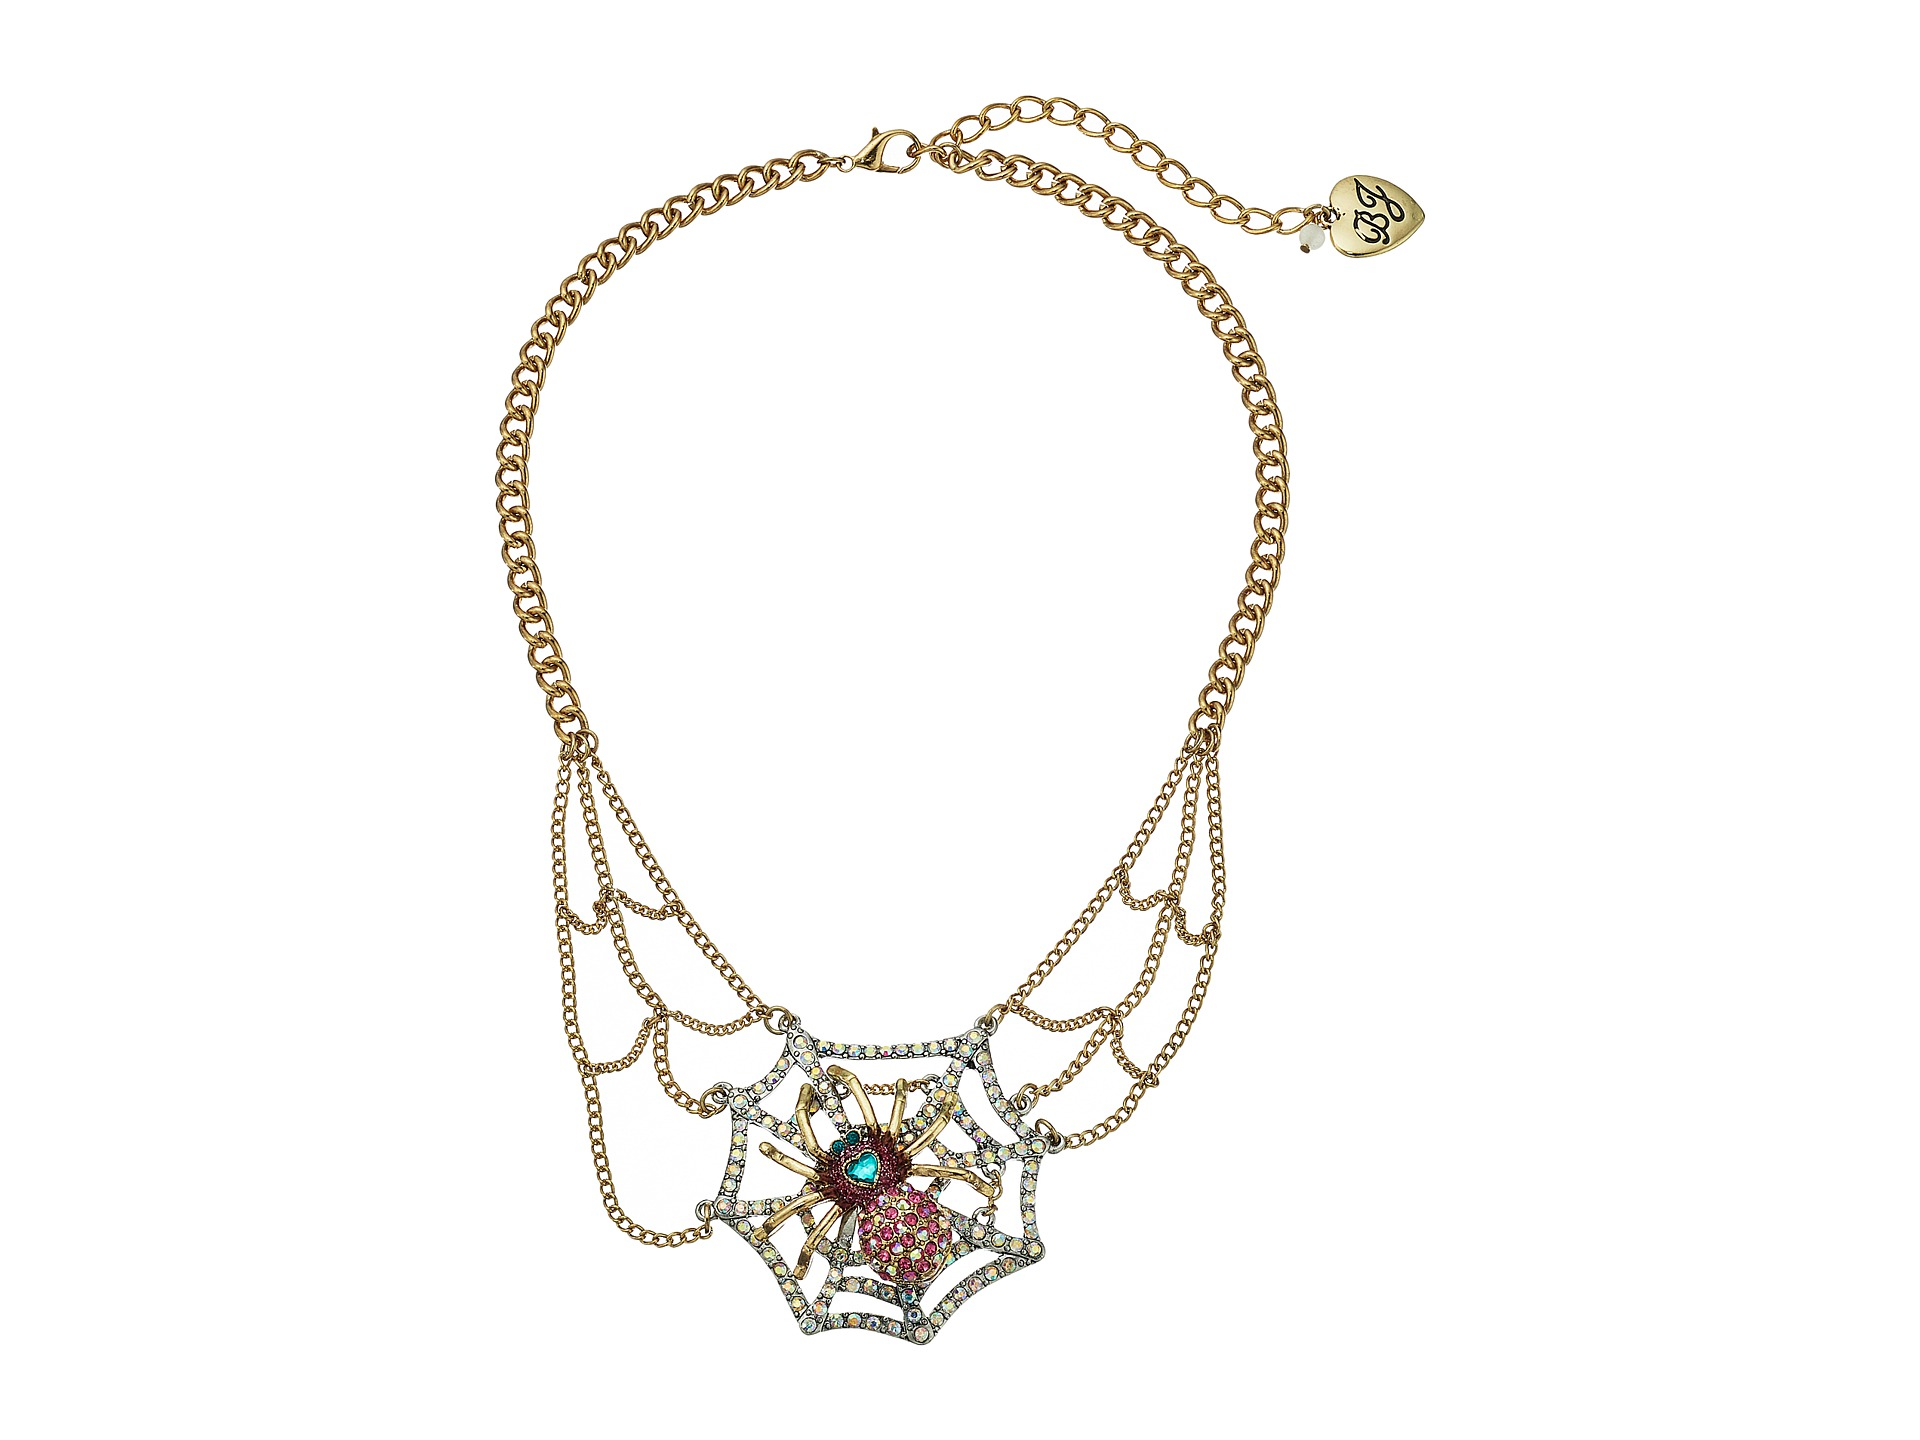 Spider Web Pendant Long Necklace : Amazon.ca: Clothing, Shoes & Accessories